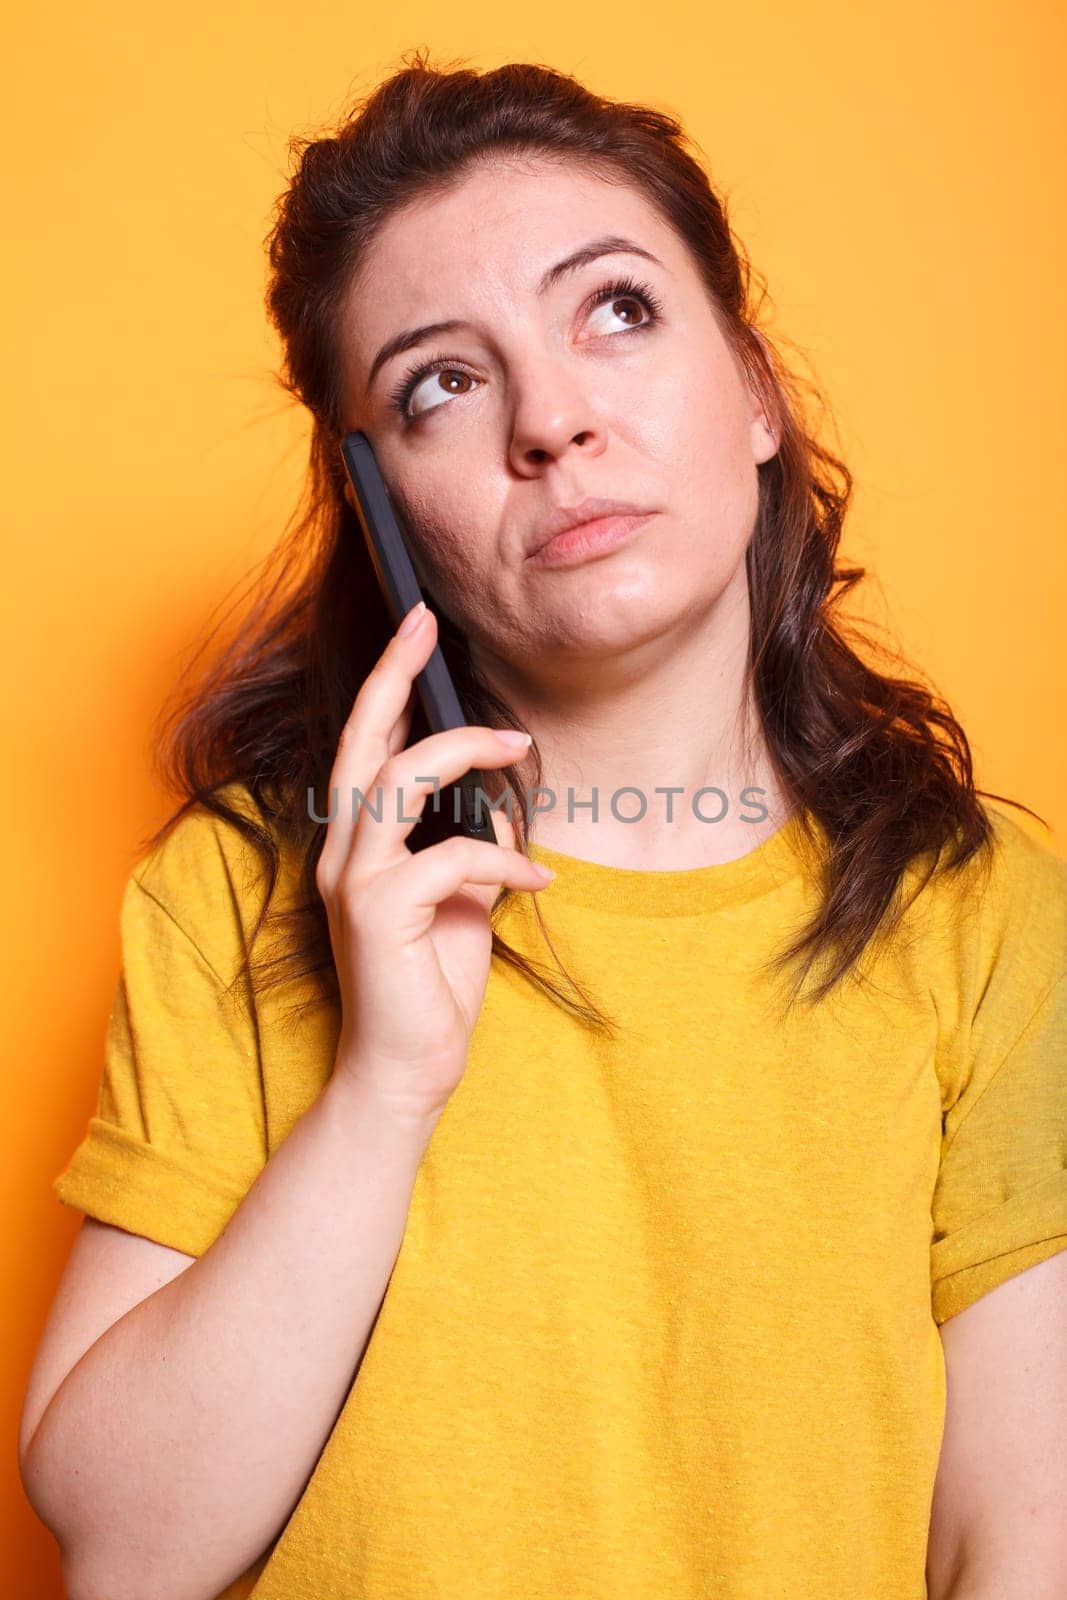 Woman in thoughts having a phone call by DCStudio